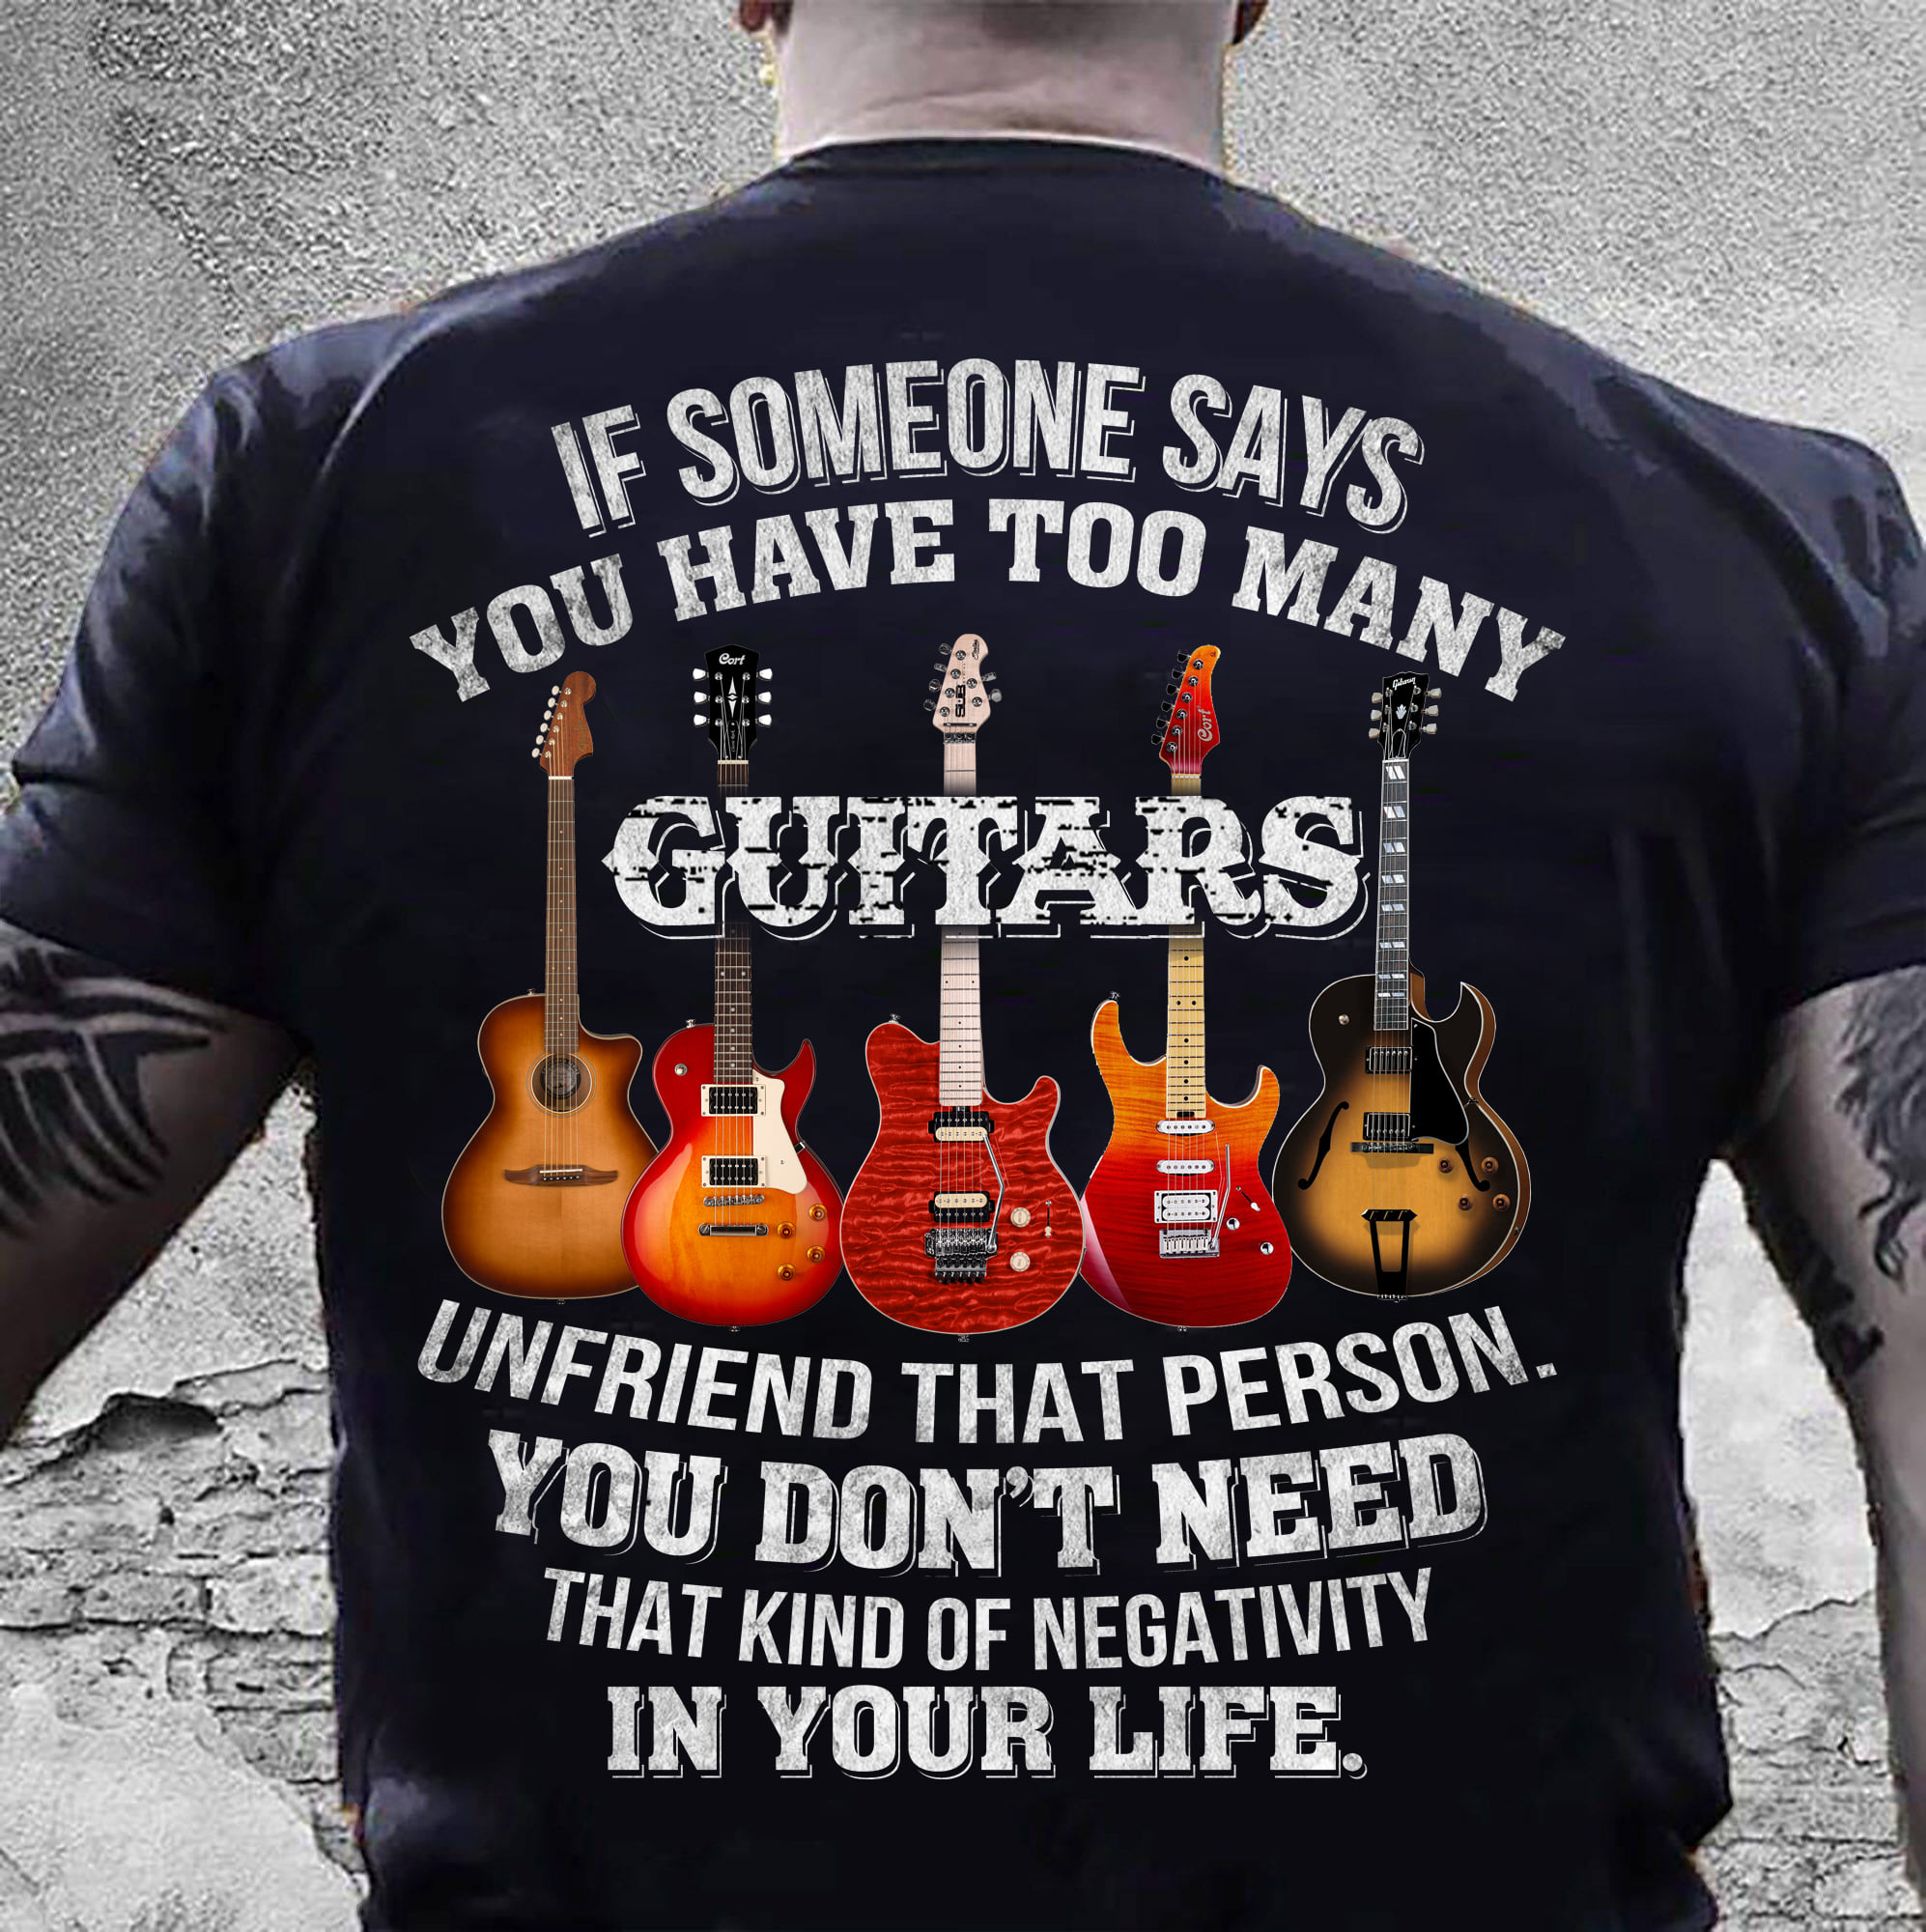 If someone says you have too many guitars unfriend that person